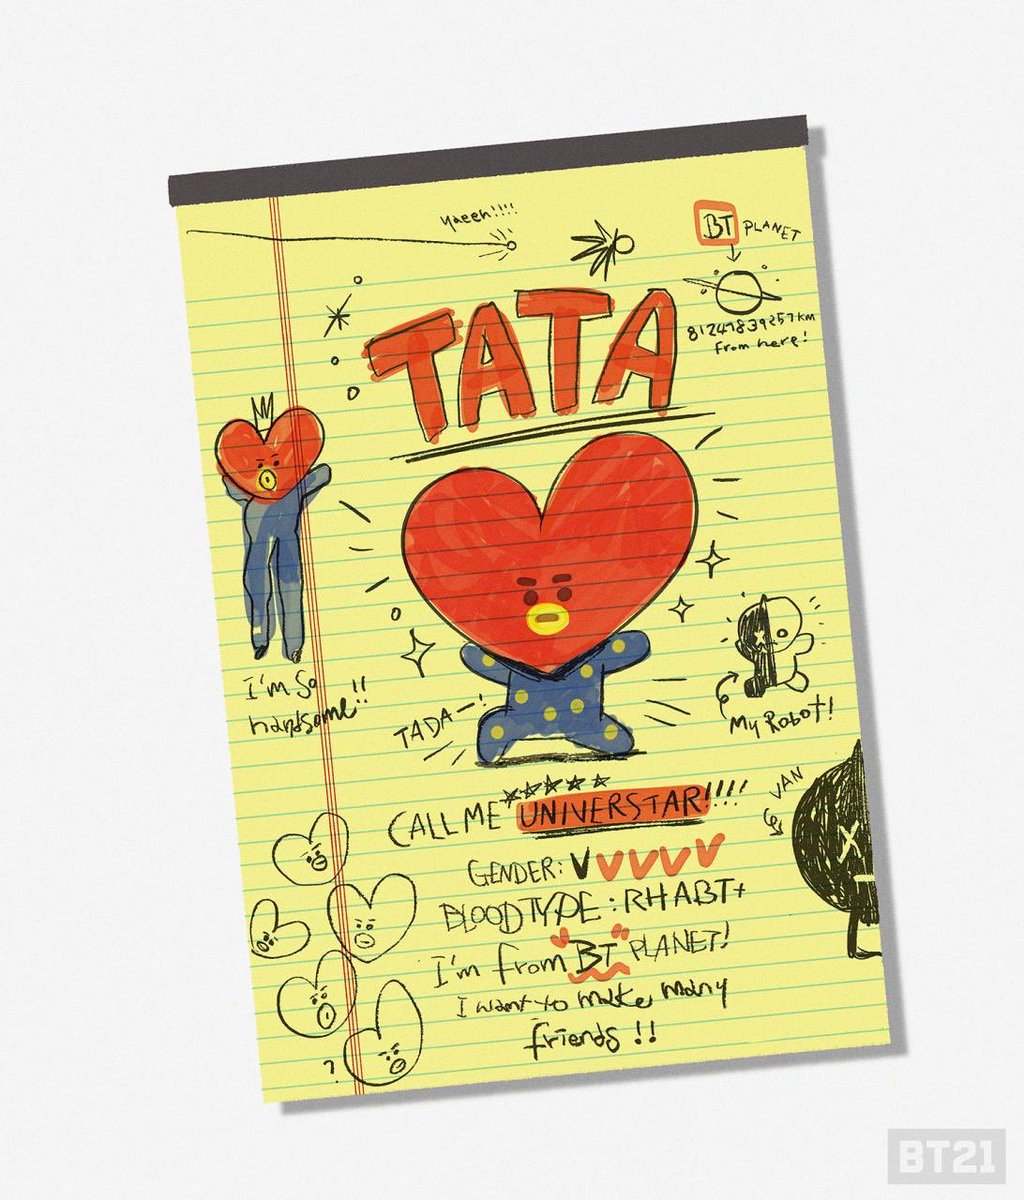 He also made Tata, his BT21 character, genderless. Opting to put a series of 'v's or hearts on its profile.